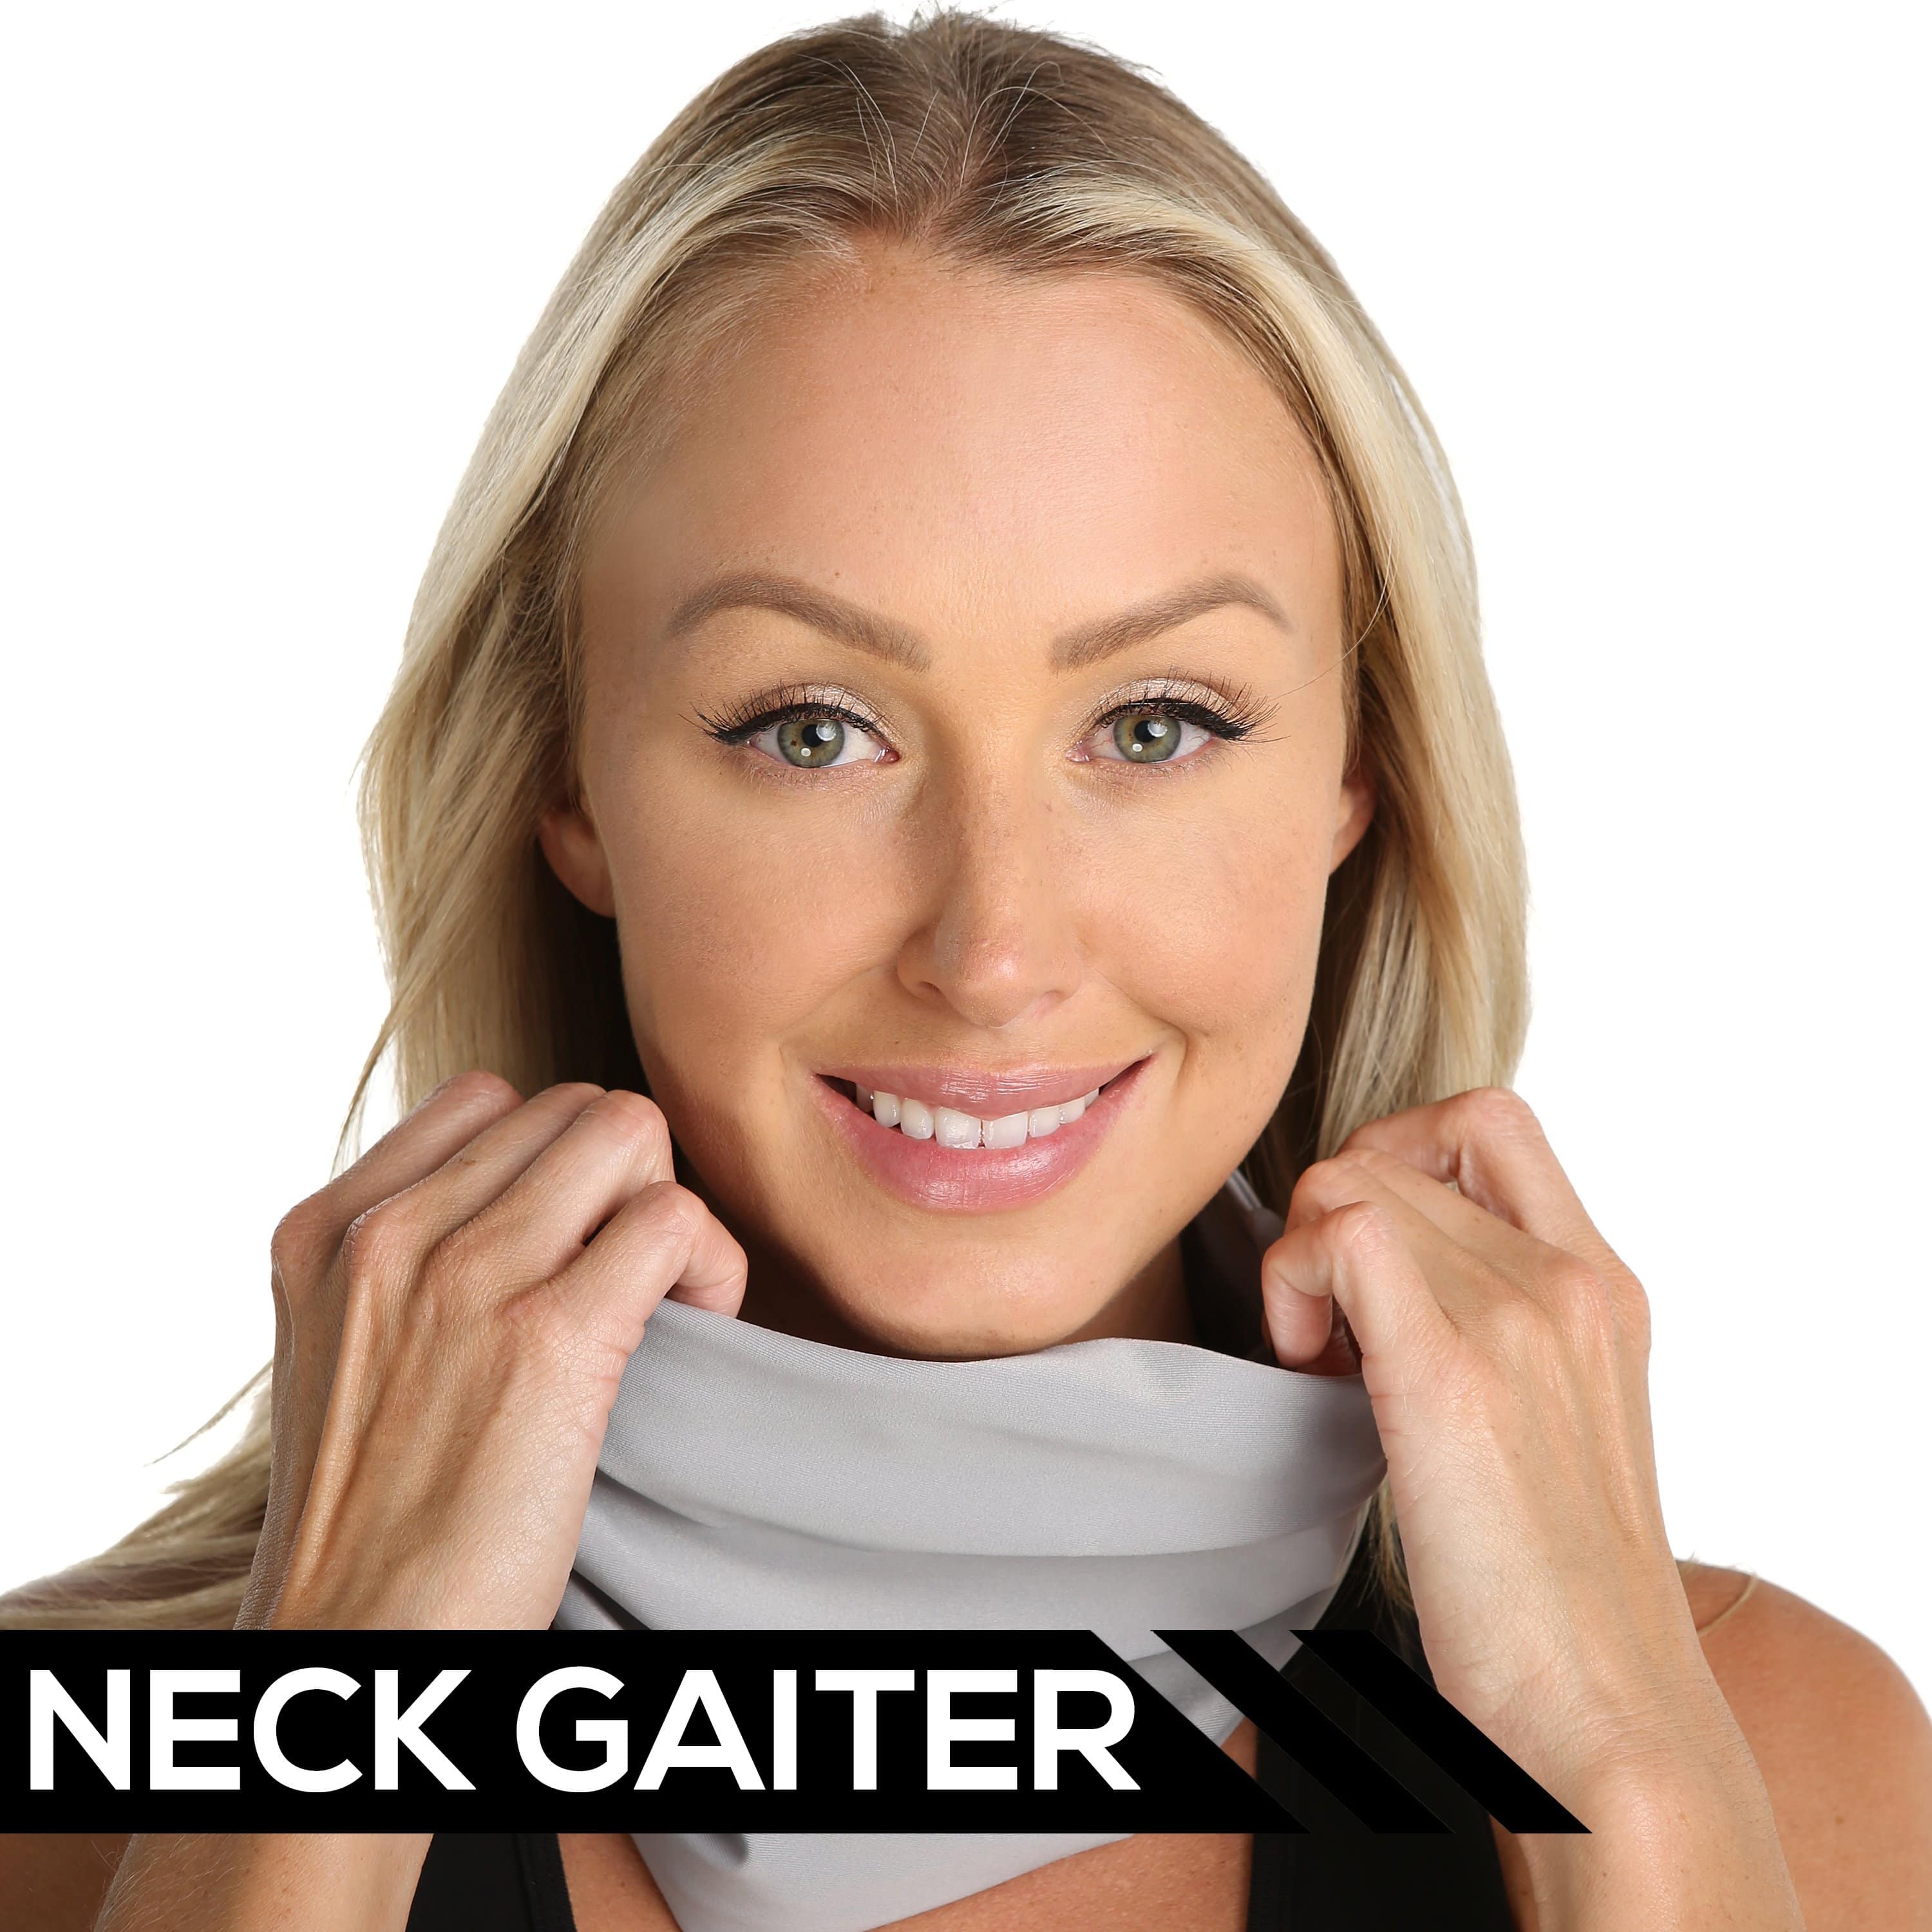 Neck gaiter that helps with sun protection in grey.